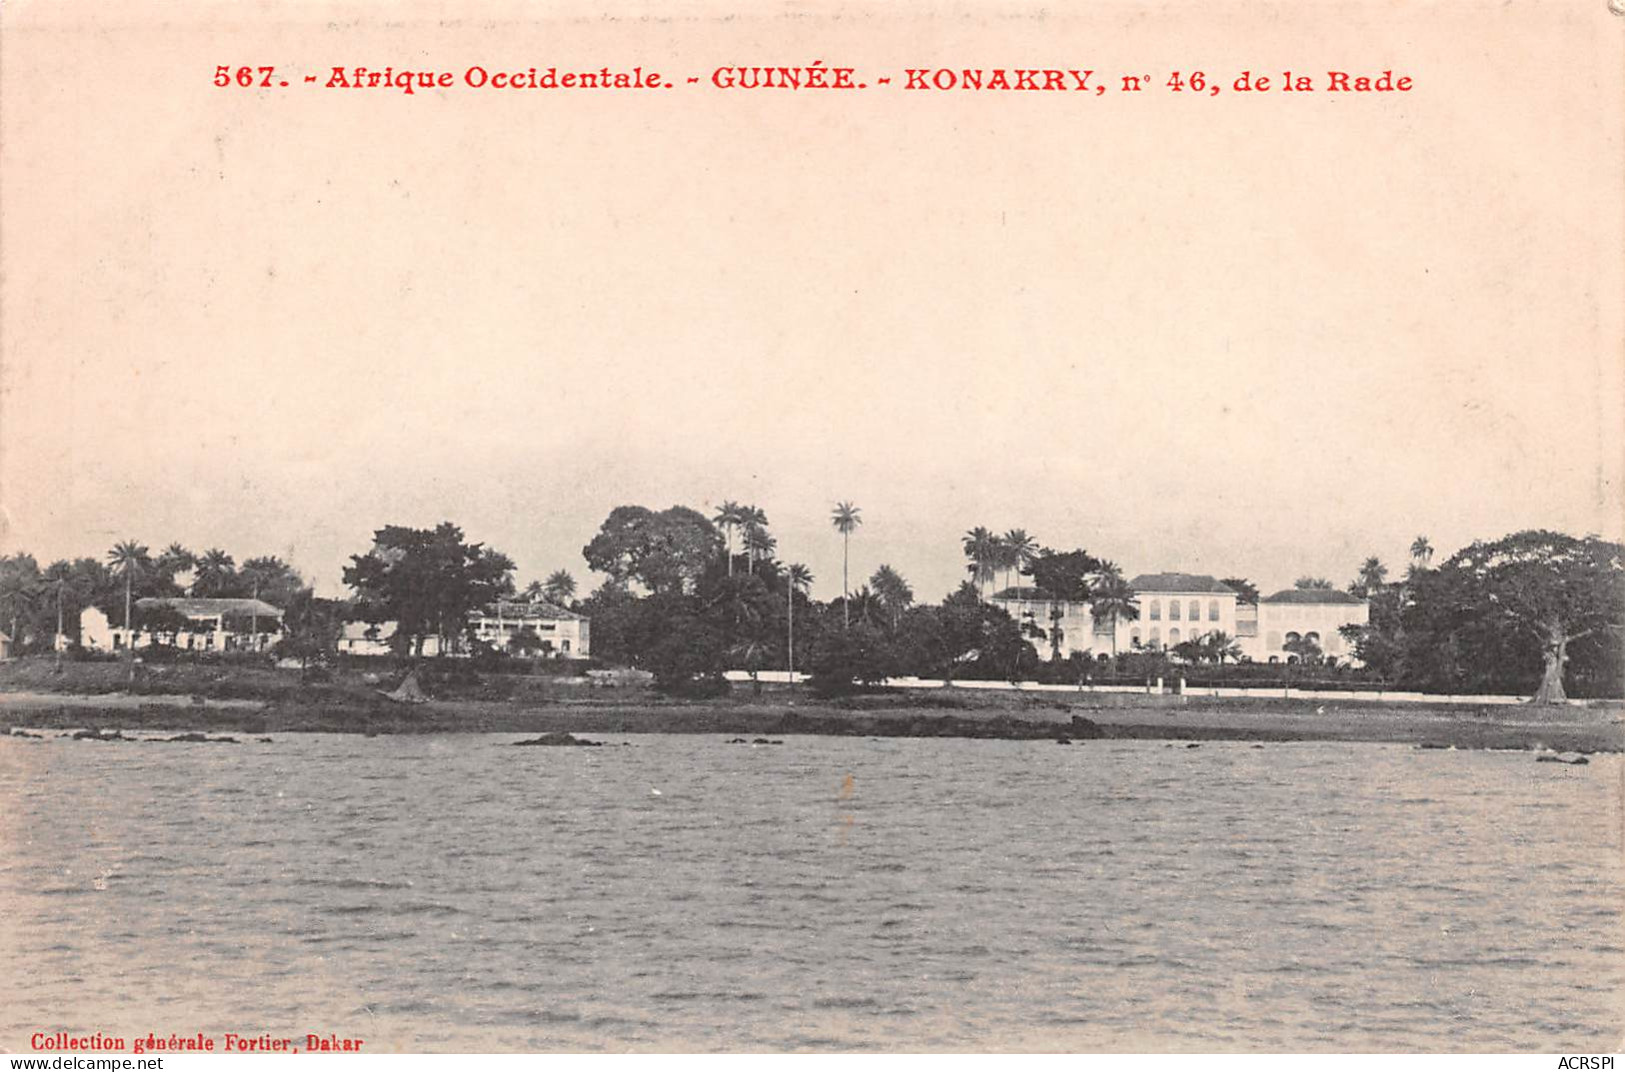 GUINEE  CONAKRY N°46 De La Rade - Ed. Fortier 567  Carte Vierge Non Voyagé (Scan R/V) N° 80 \MP7132 - French Guinea